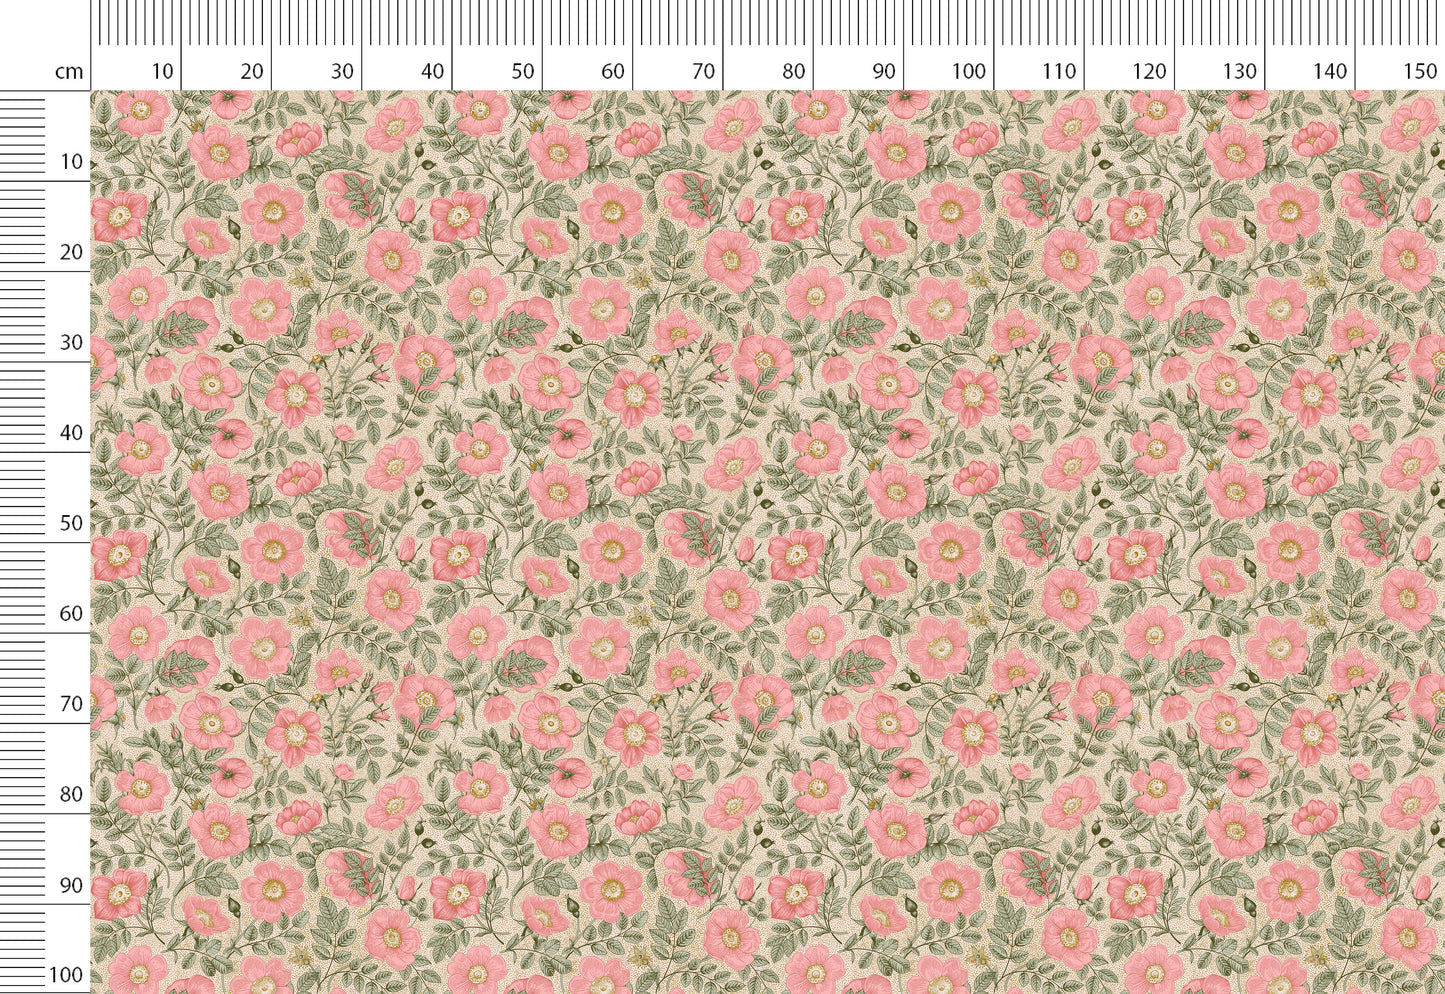 Vintage Floral Linen By The Yard or Meter, Vintage Botanical Flowers Print Linen Fabric For Clothing, Curtains & Upholstery